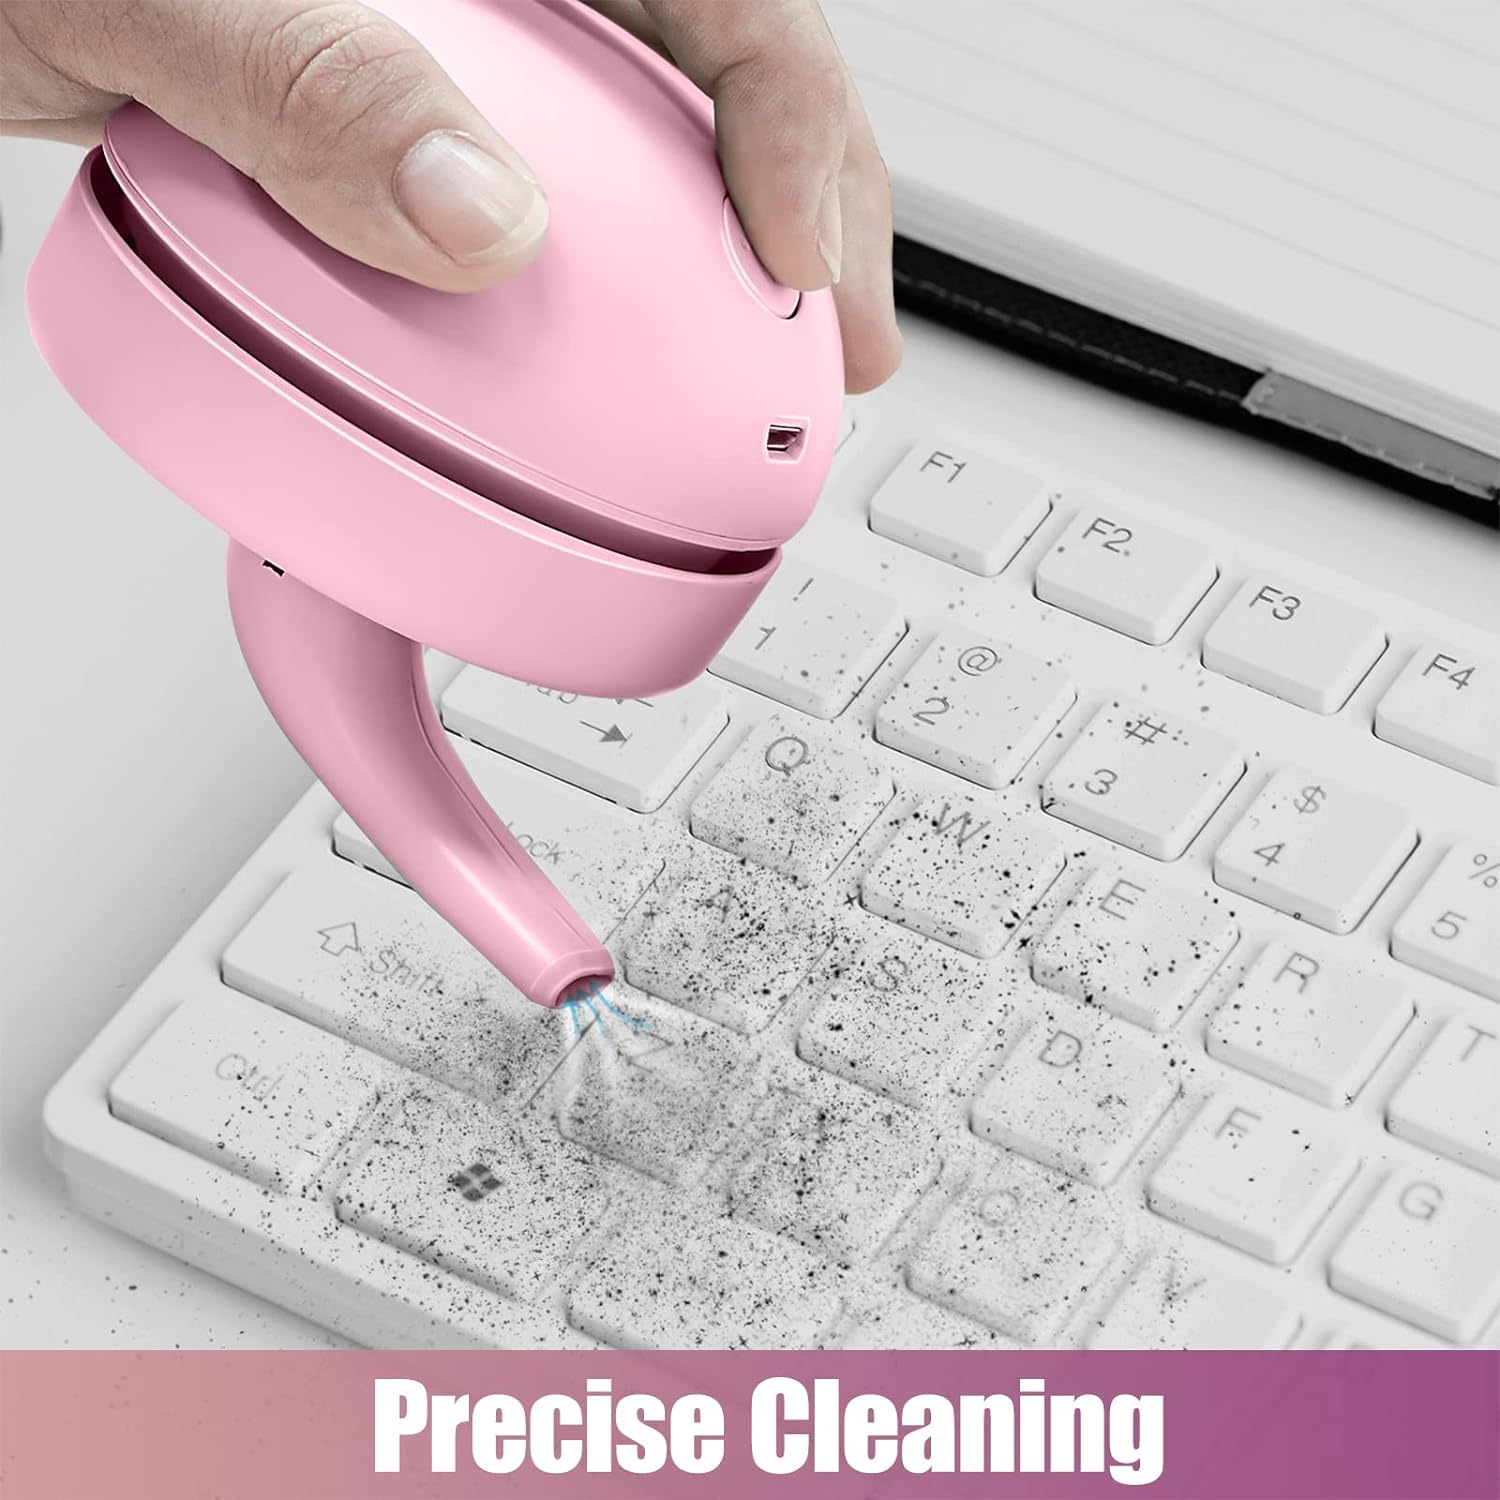 Desktop Vacuum Cleaner USB Charging with Vacuum Nozzle Cleaning Brush, Detachable Design & Portable Mini Table Dust Vaccum Cleaner, Best Cleaner for Cleaning Dust, Crumbs, Piano, Computer, Car Etc